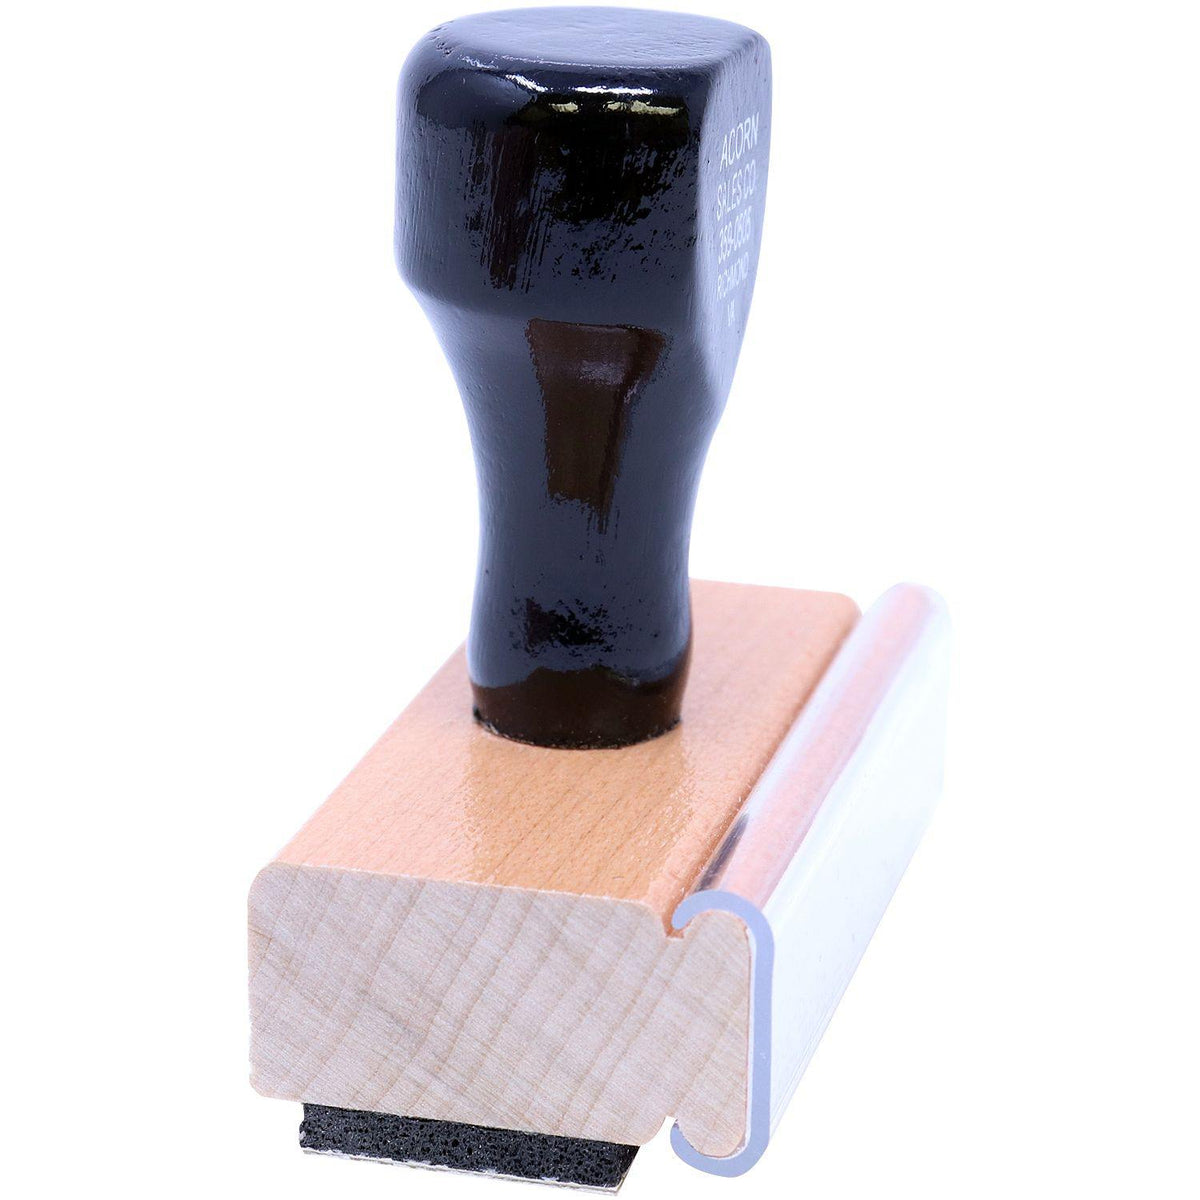 Side View of Large Anesthesiology Rubber Stamp at an Angle